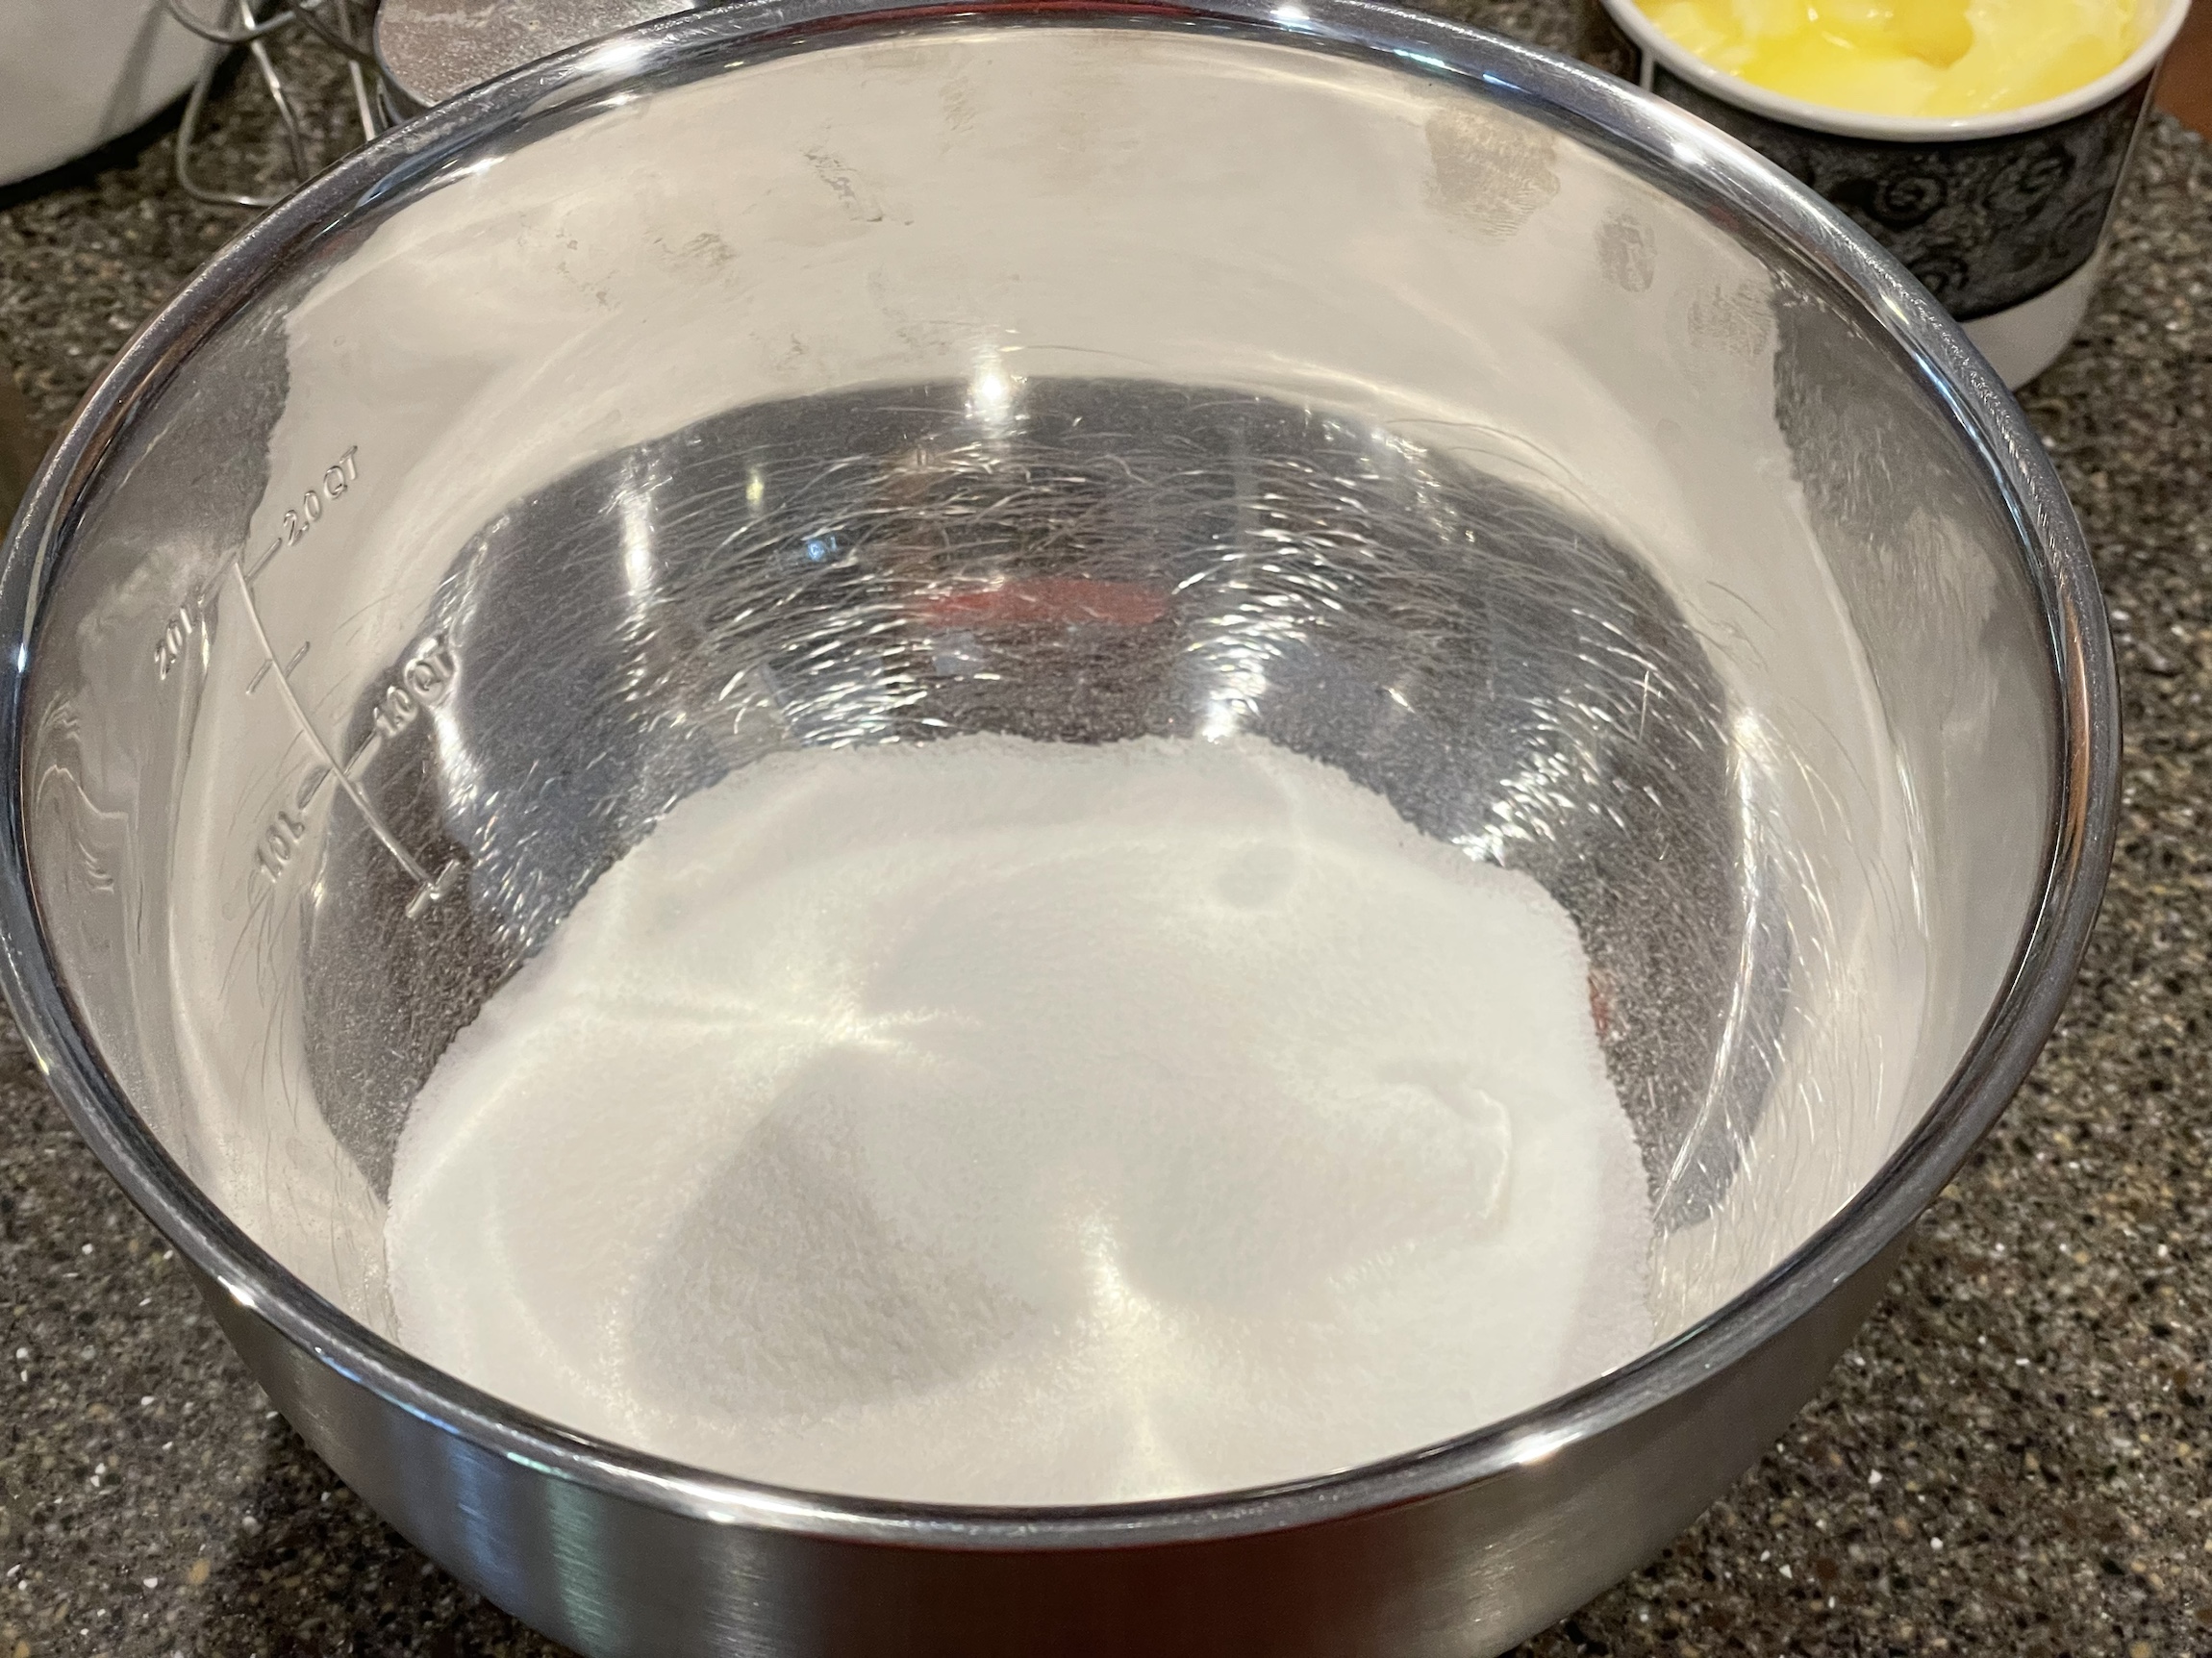 Mix sugar and vanilla extract in large bowl